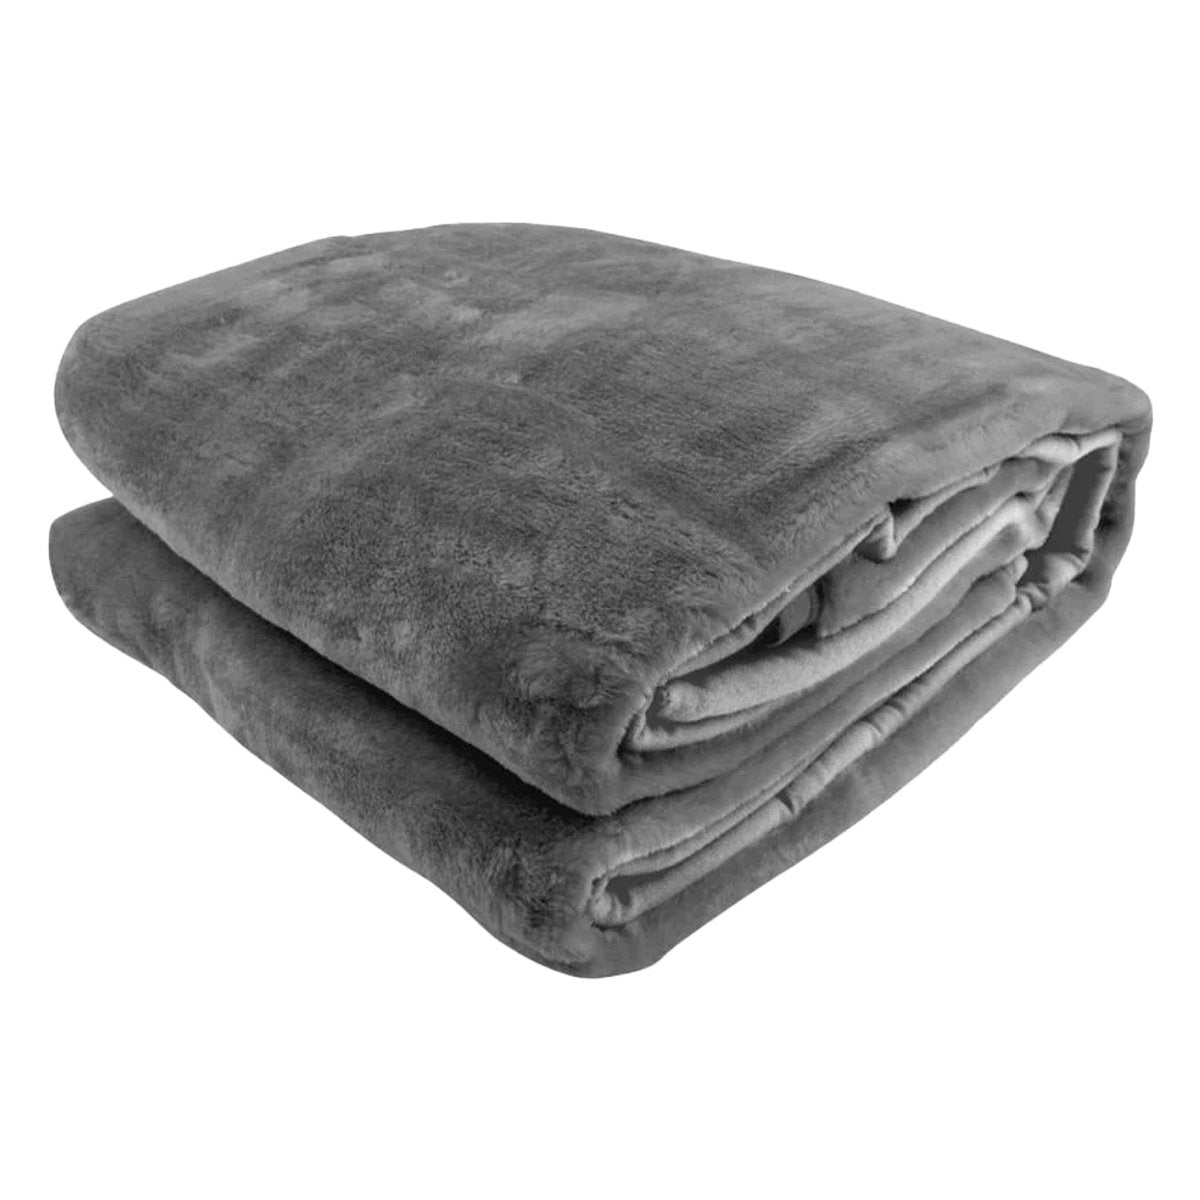 Laura Hill Faux Mink Blanket 800GSM Heavy Double-Sided - Silver